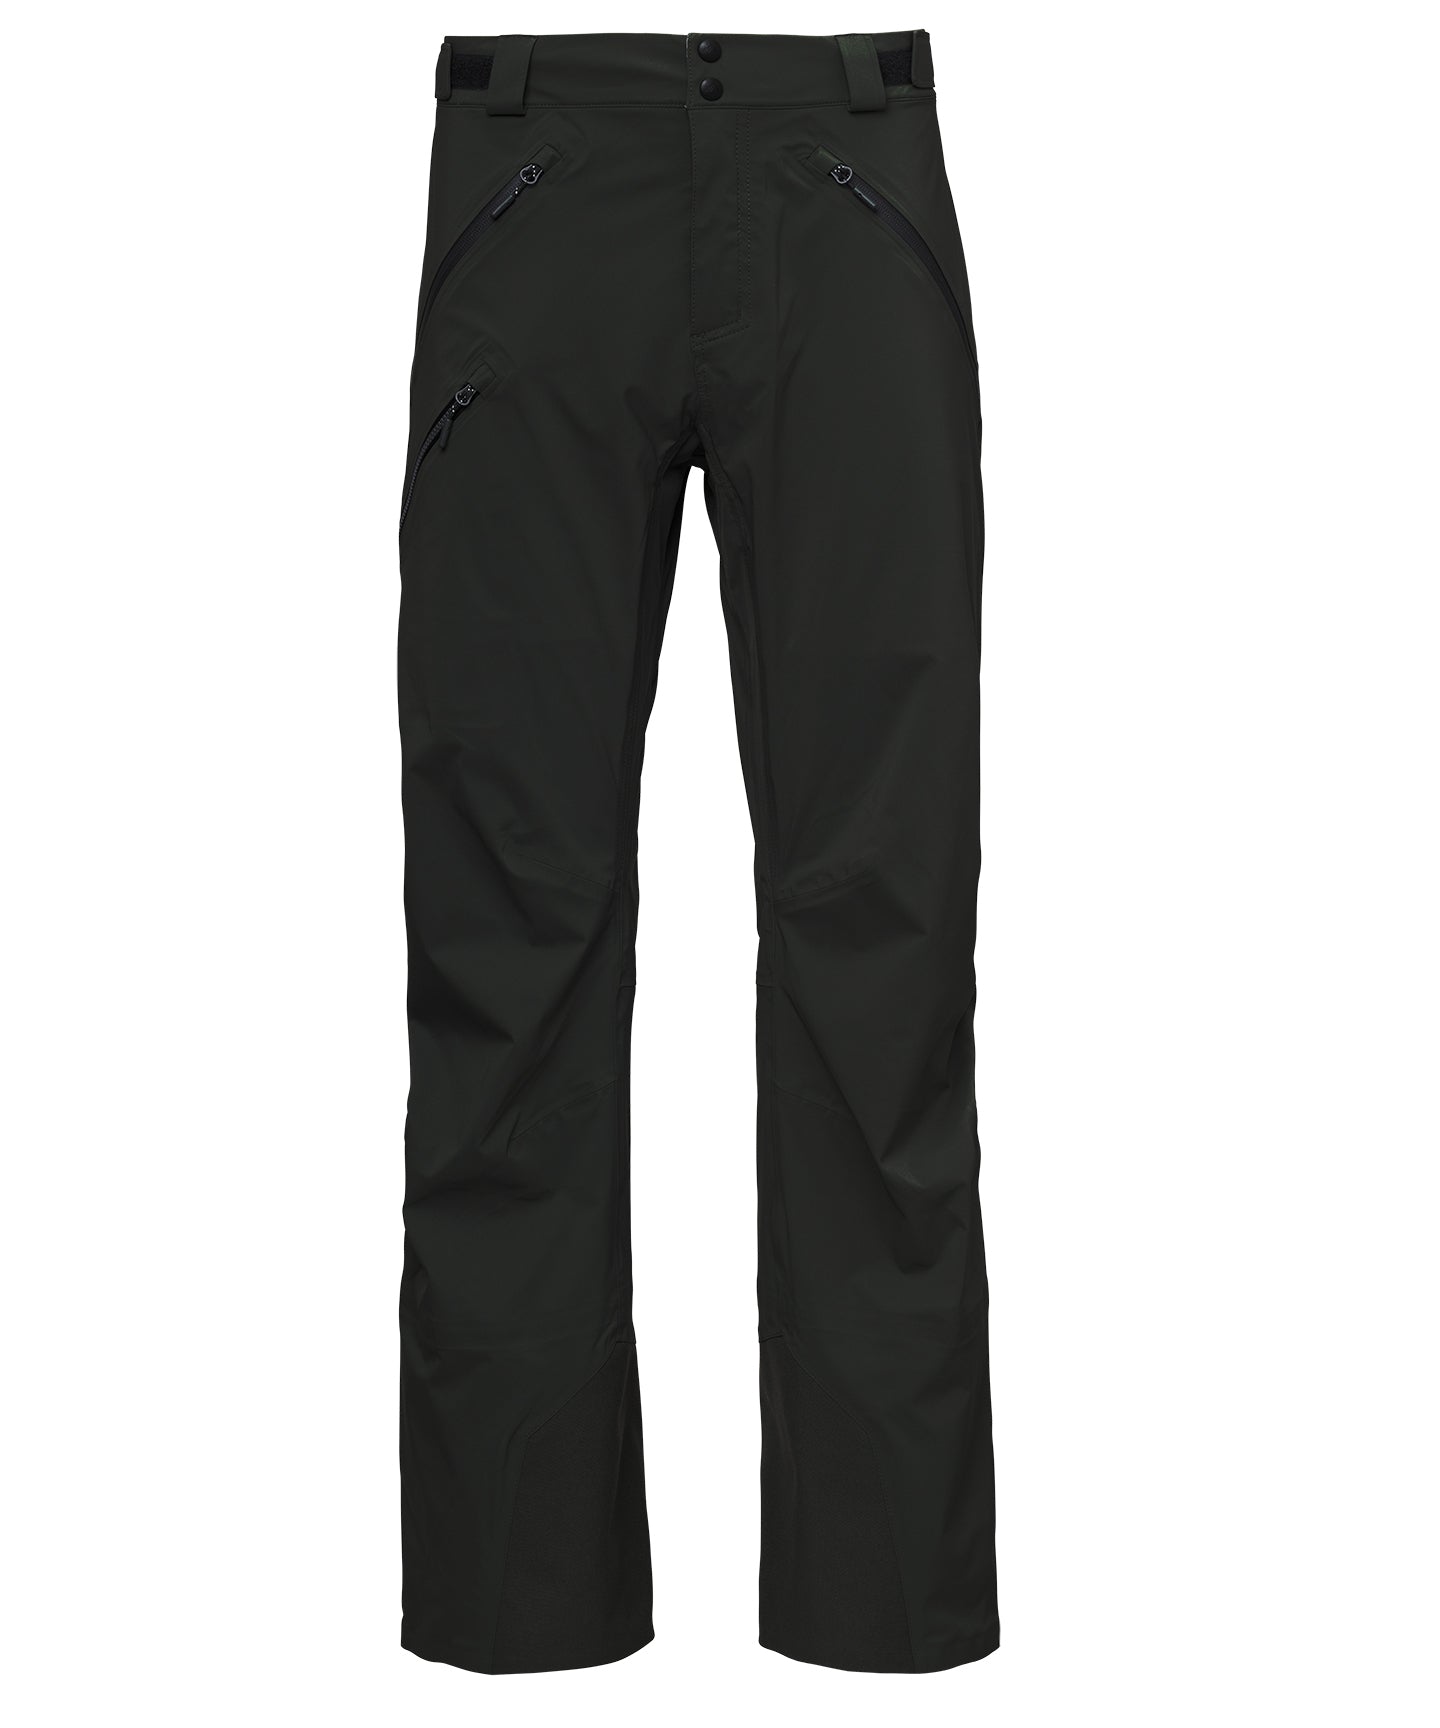 strafe outerwear fall/winter 23/24 collection men's capitol pant in black